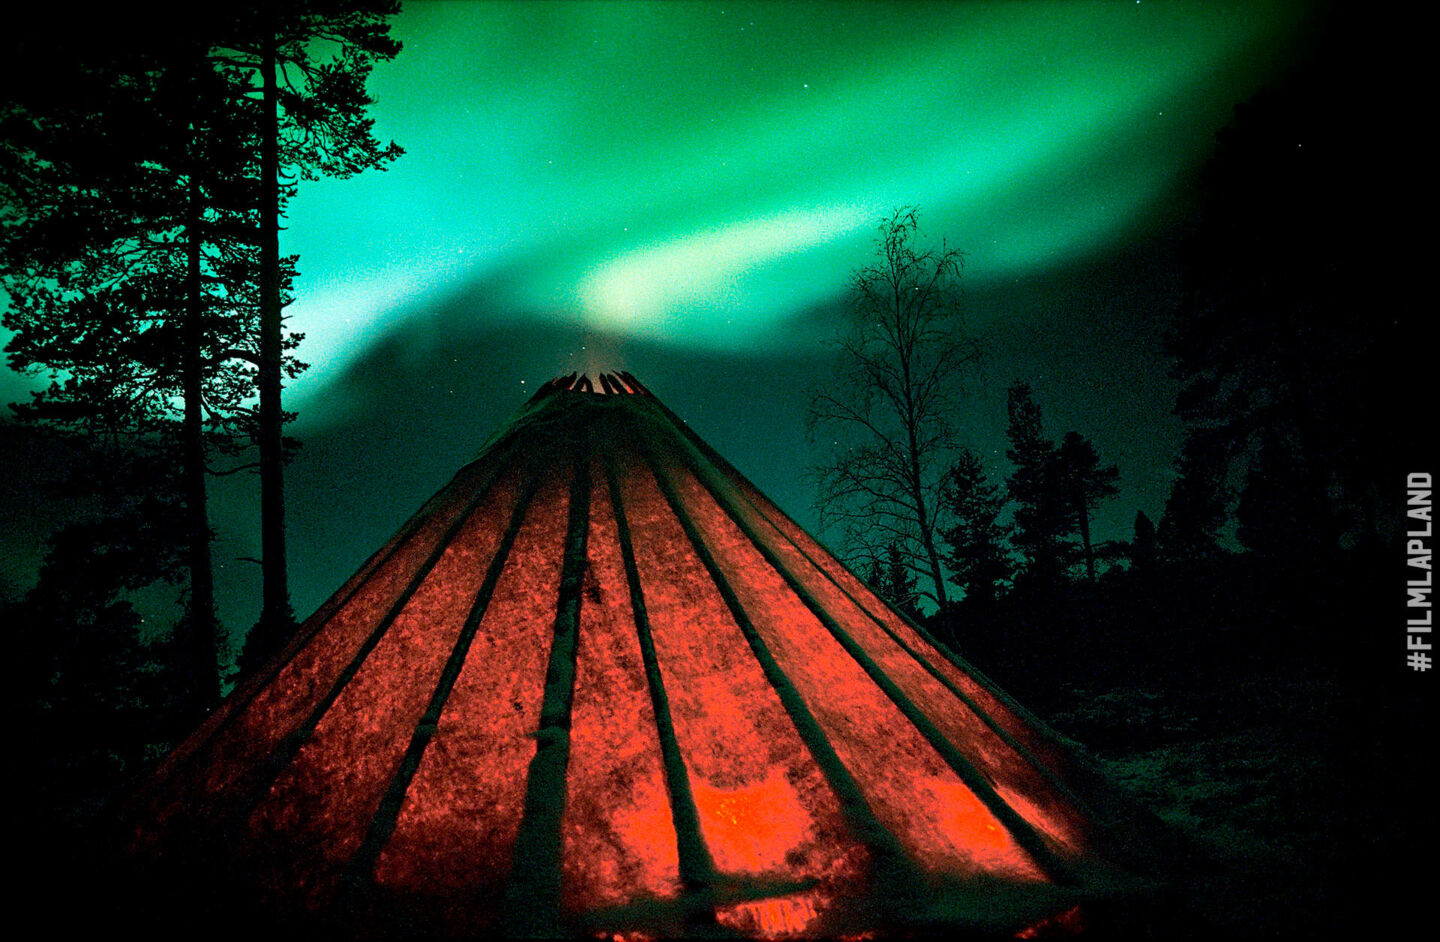 Camping under the Northern Lights, a Finnish Lapland filming location feature